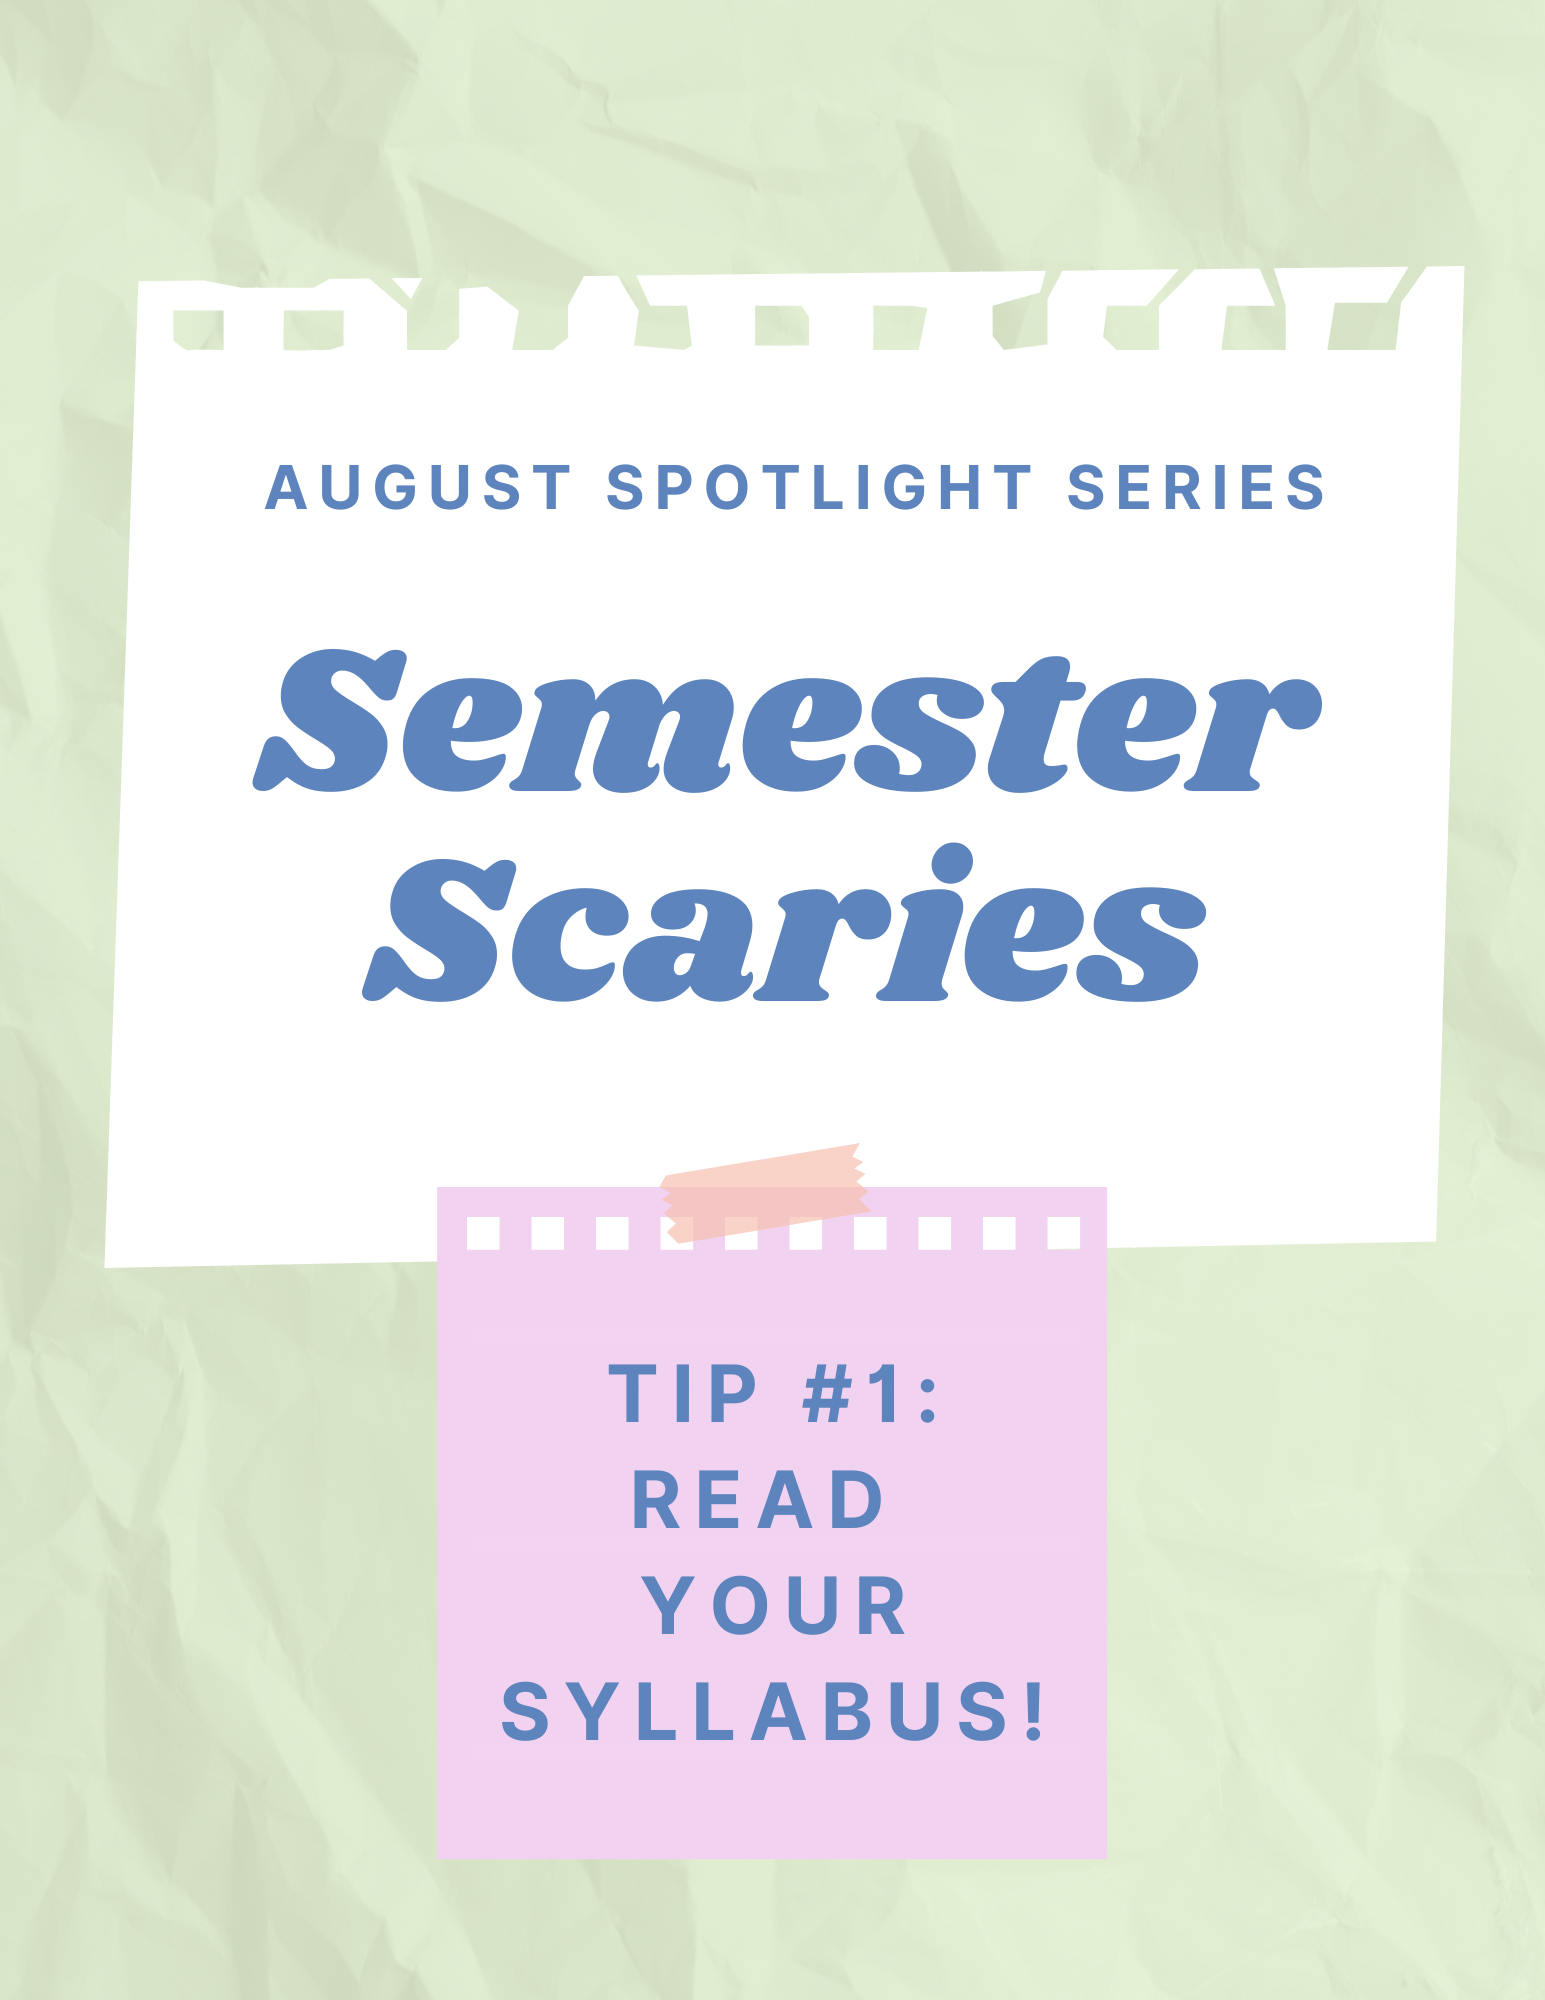 "august spotlight series Semester Scaries" on notepad with "Tip #1 Read your syllabus" on a pink post-it-note 